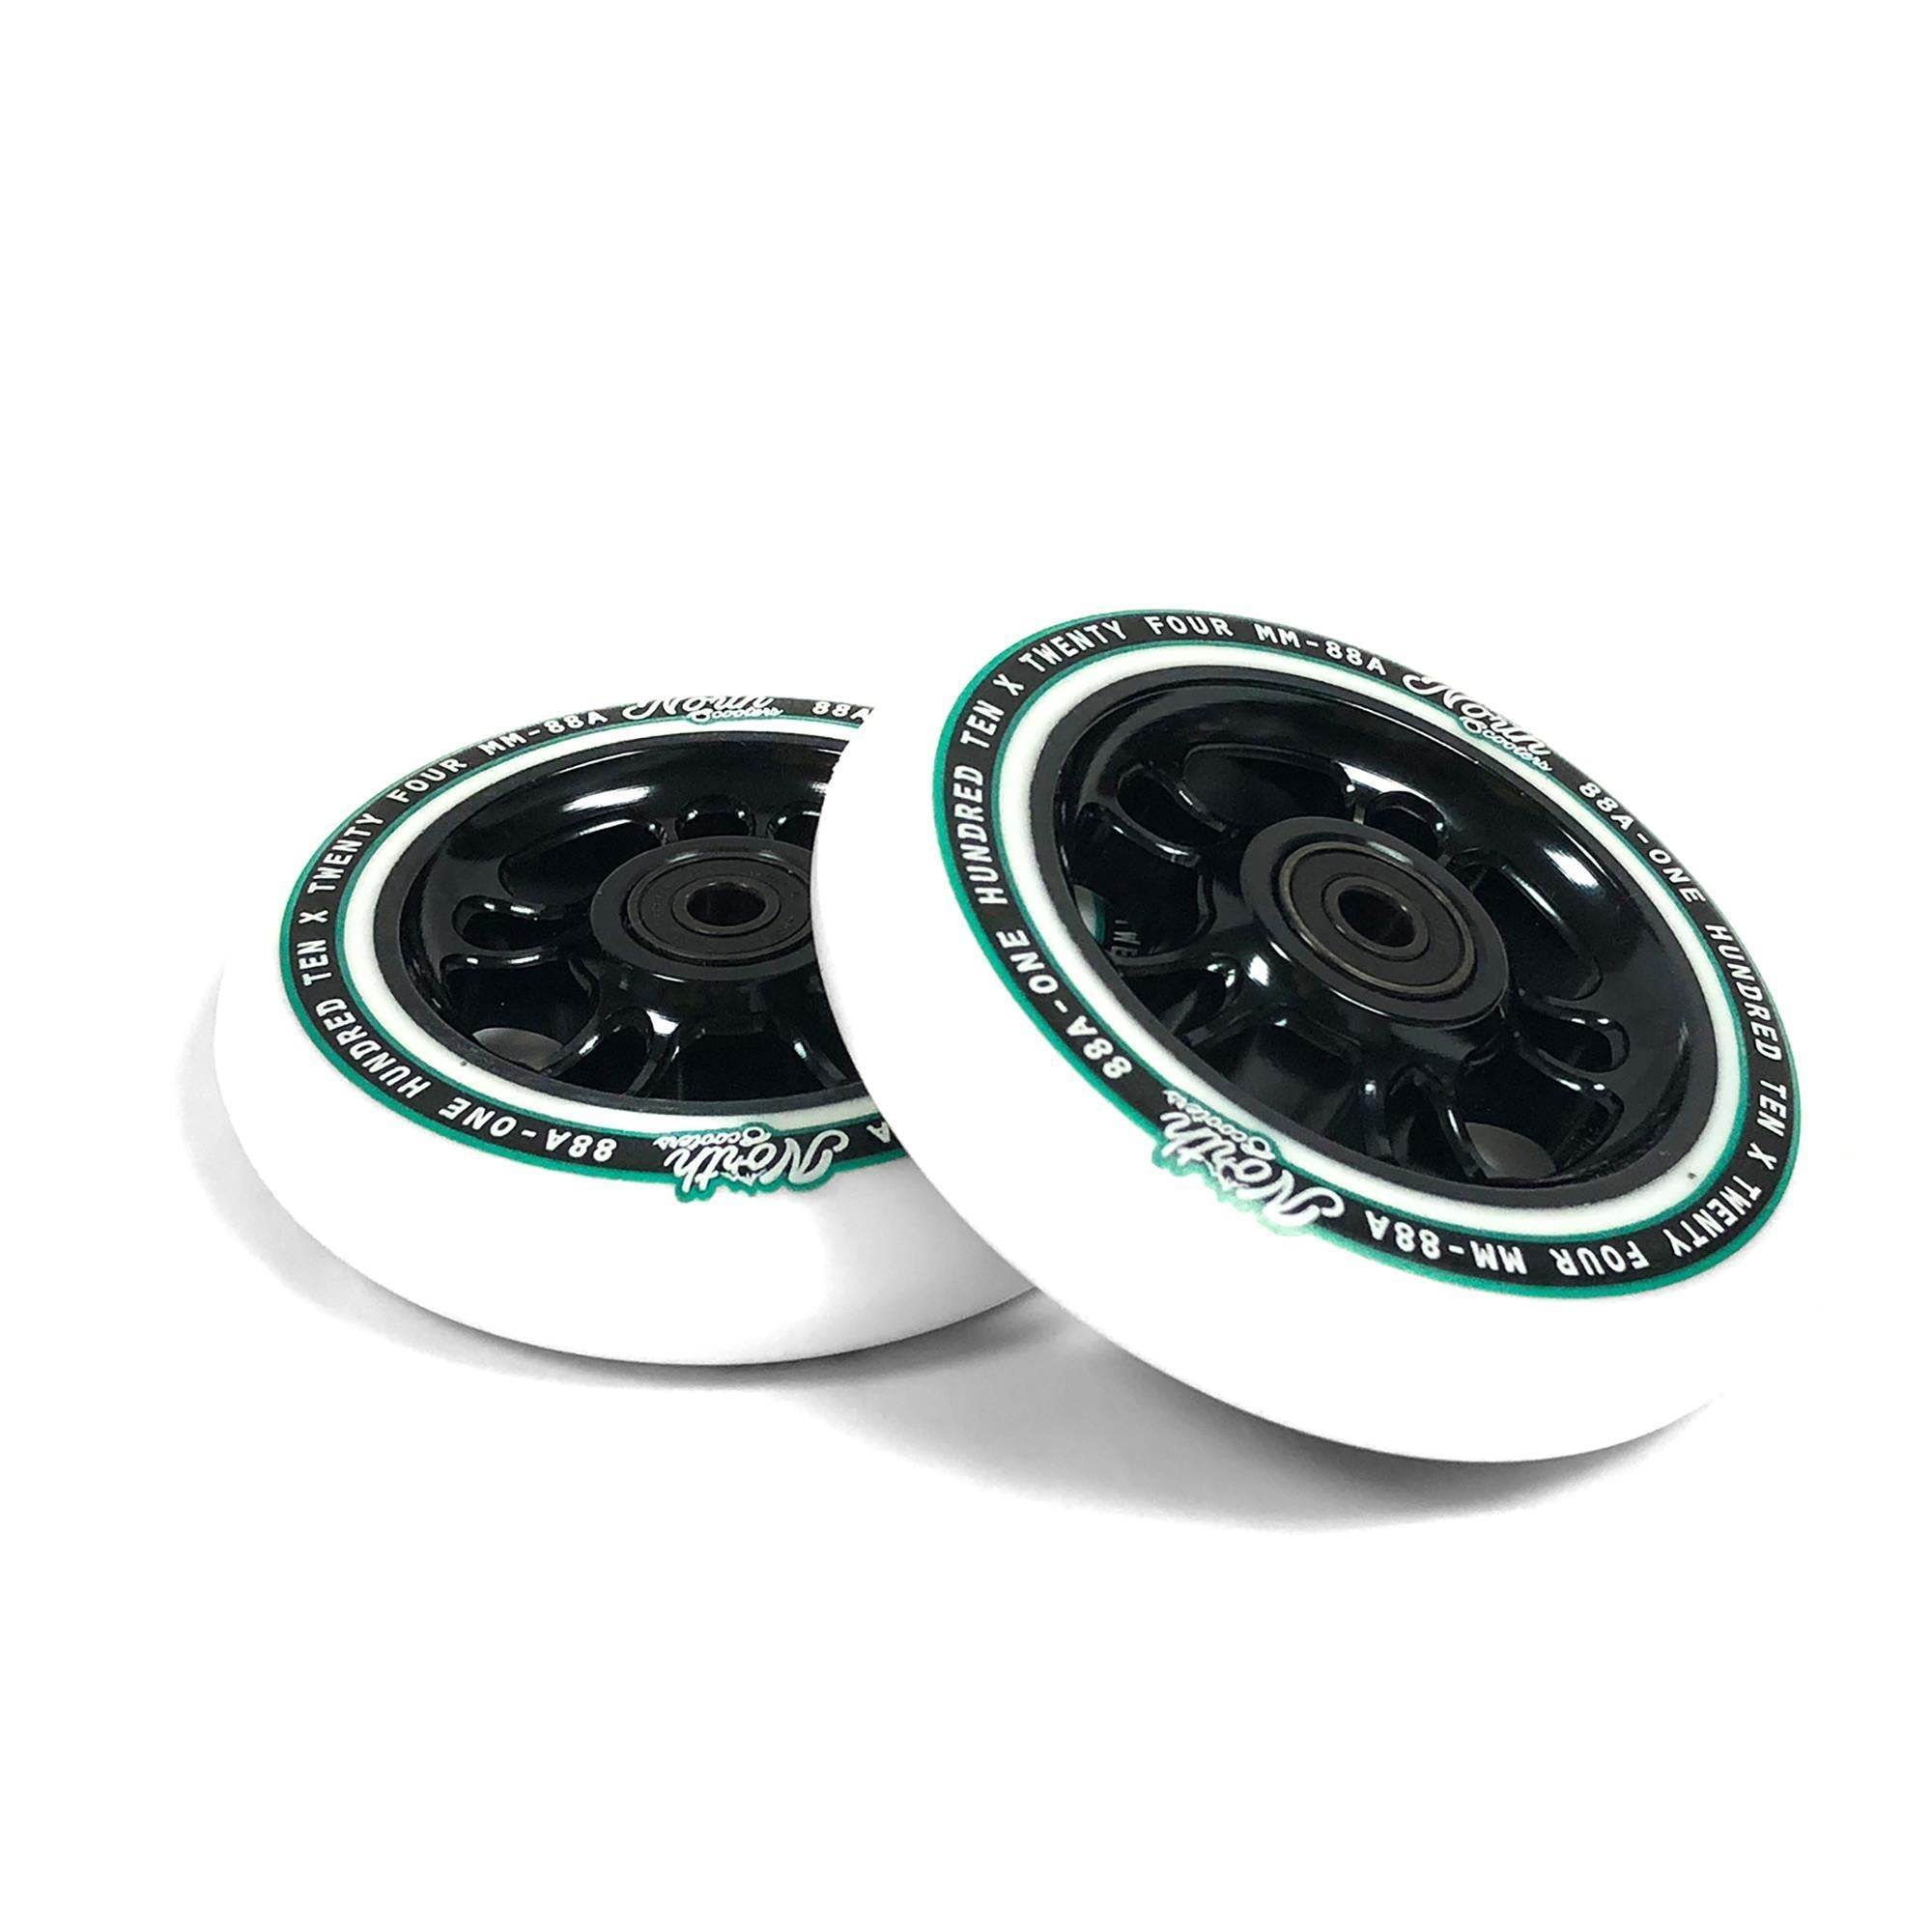 North Scooters Wagon 110mm White PU (PAIR) - Scooter Wheels Black